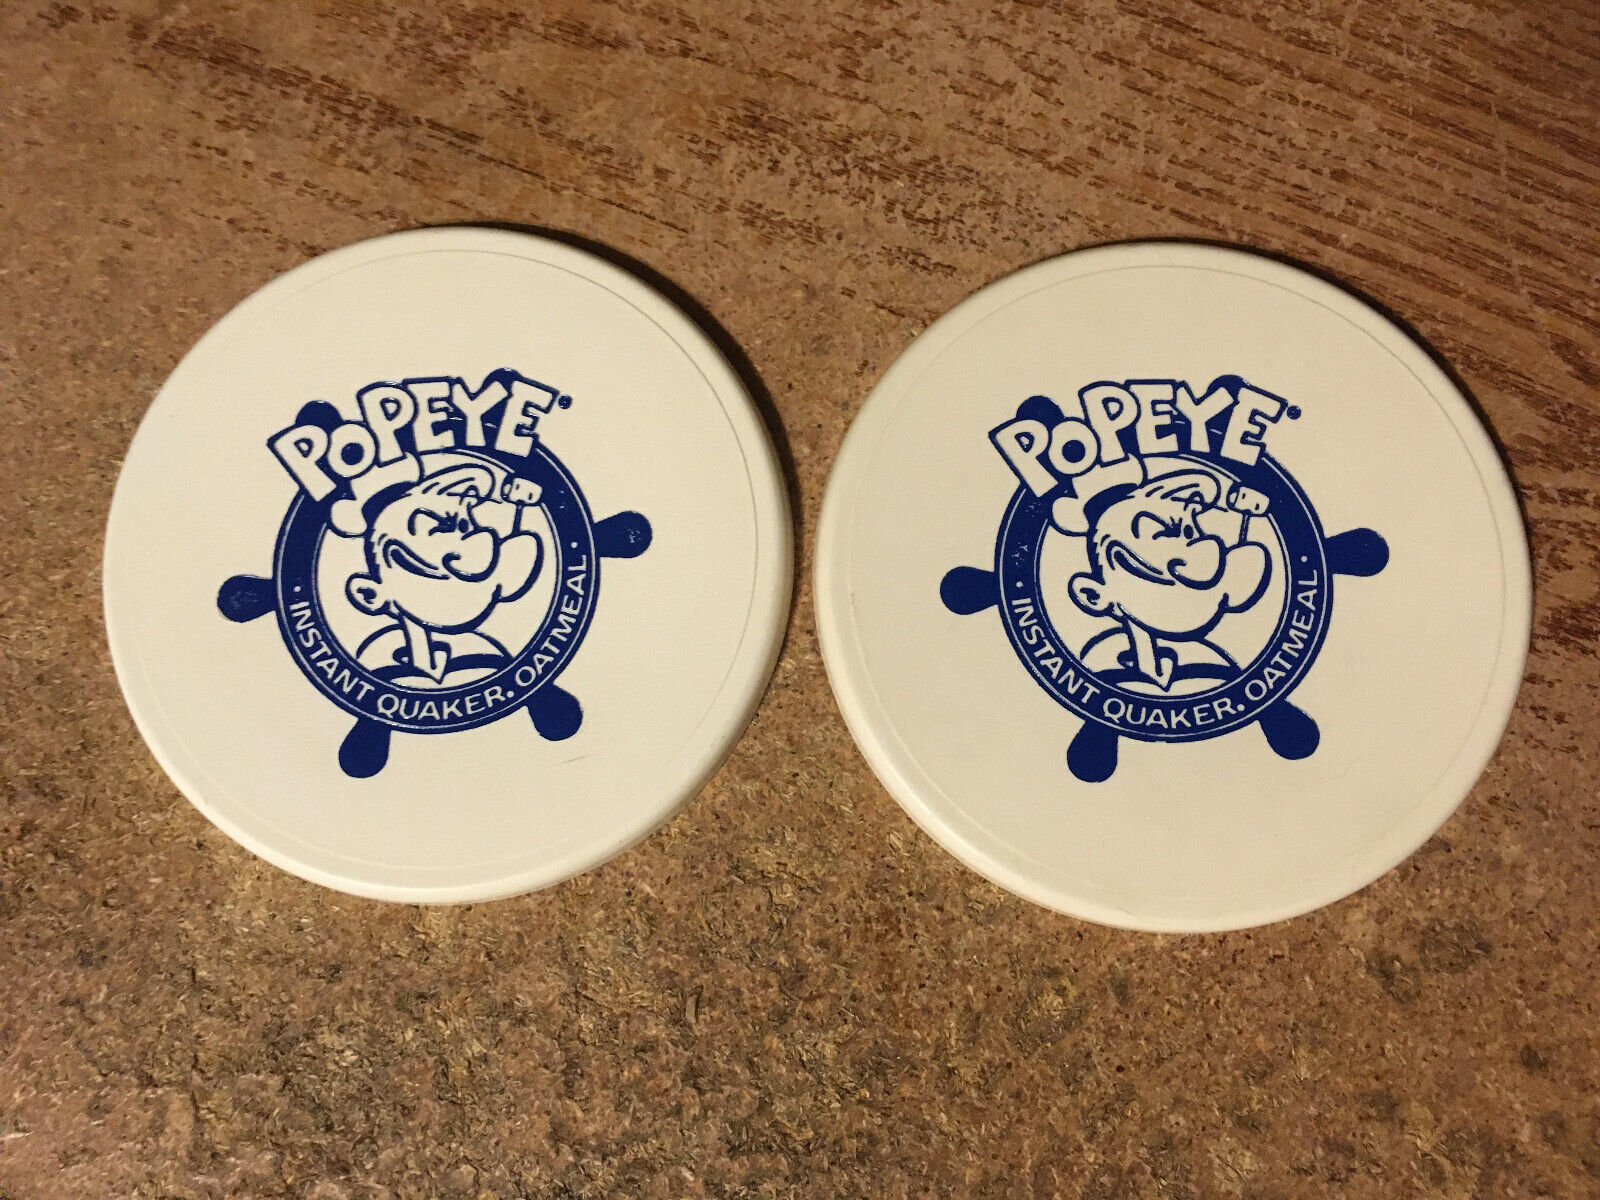 2X VINTAGE QUAKER OATS POPEYE WANTS A QUAKER 1990 CEREAL BOWL LID / WRONGWAY052